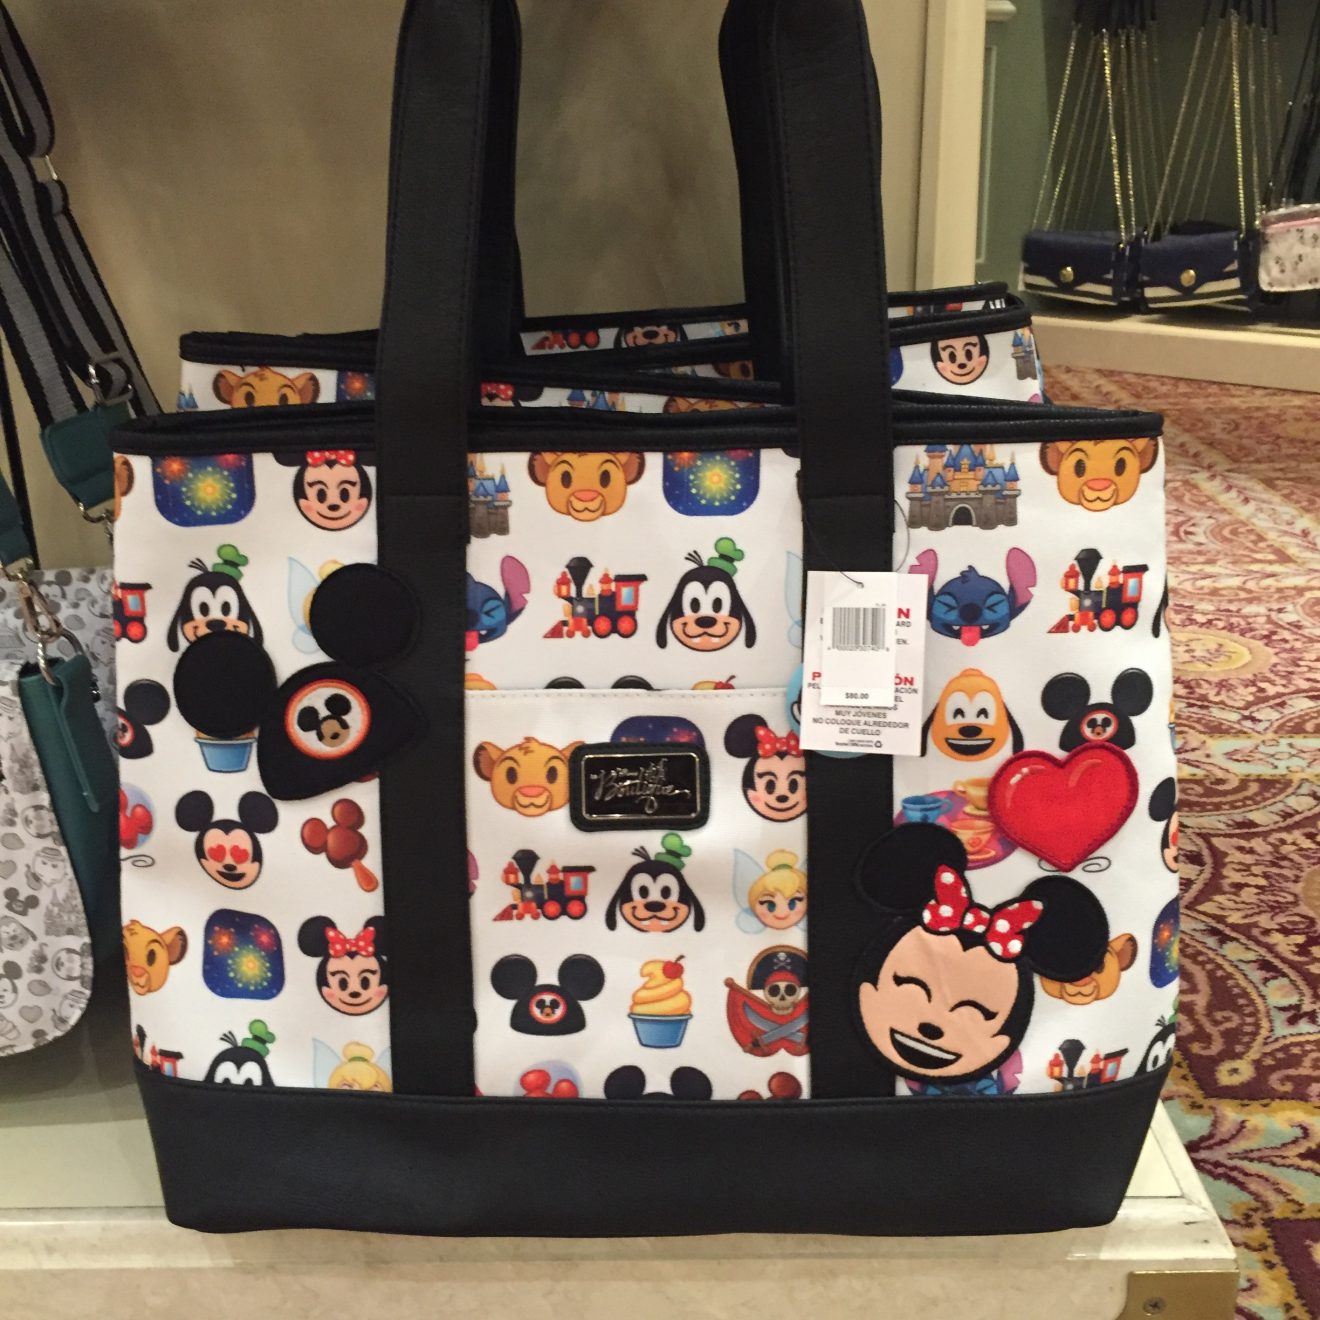 Disney's New Emoji Collection Will Give You Heart-Eyes! - Style